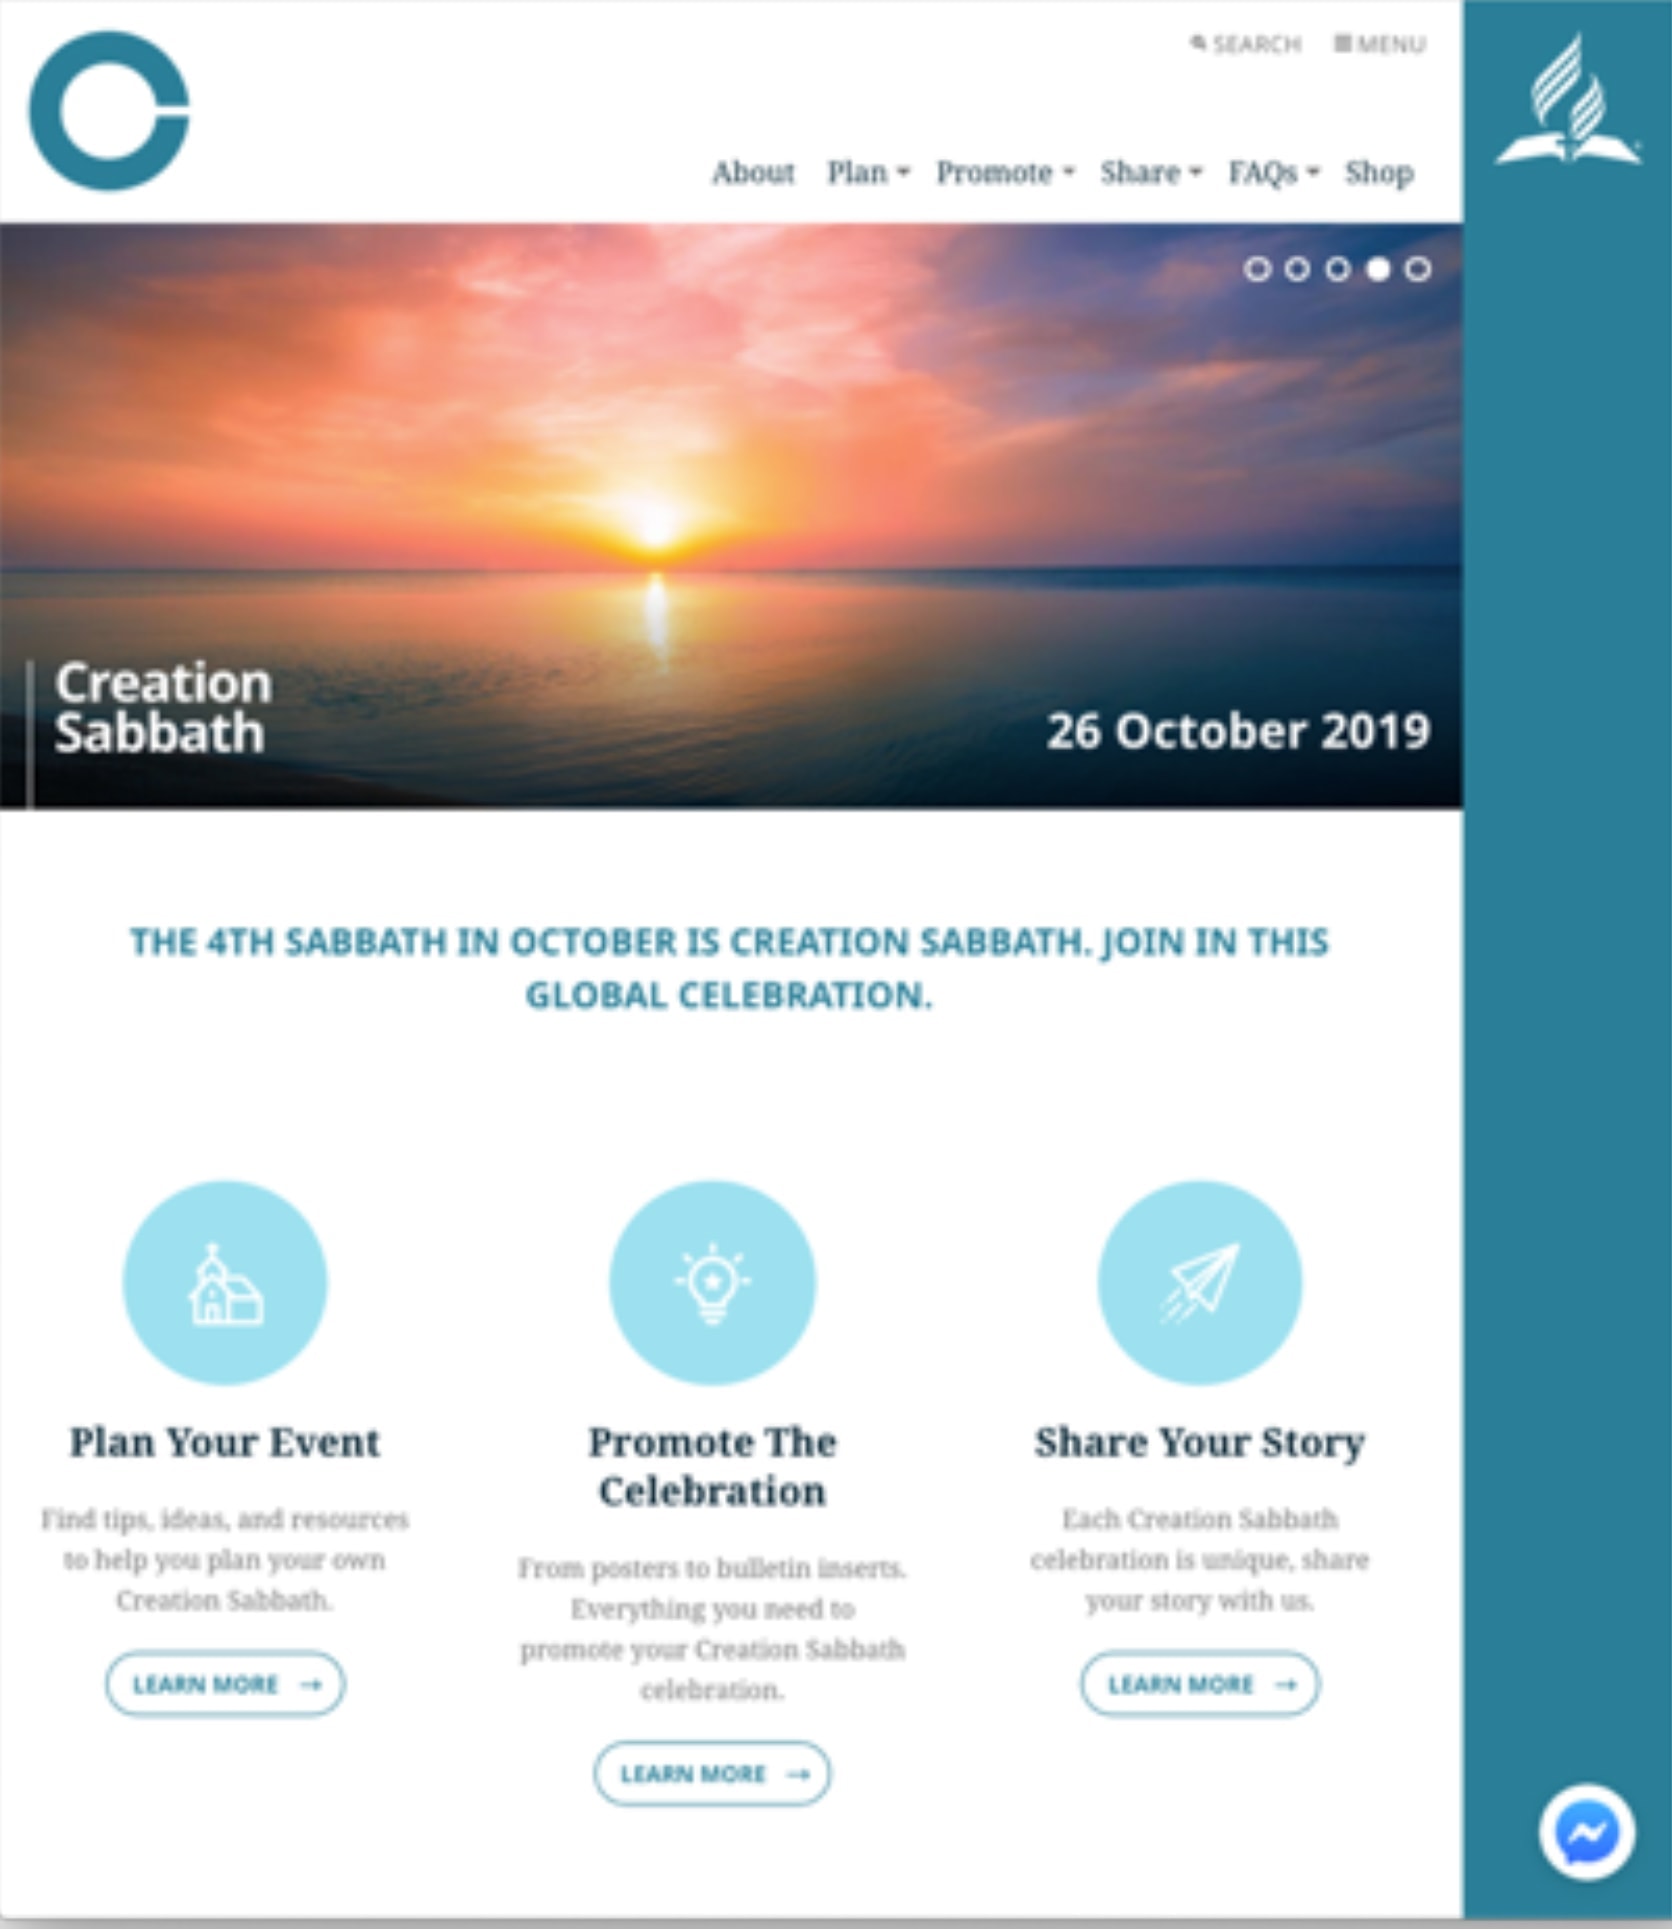 The new Creation Sabbath homepage shares resources for the initiative of the Adventist Church’s Geoscience Research Institute. In 2019, Creation Sabbath is October 26. [Image: Geoscience Research Institute]